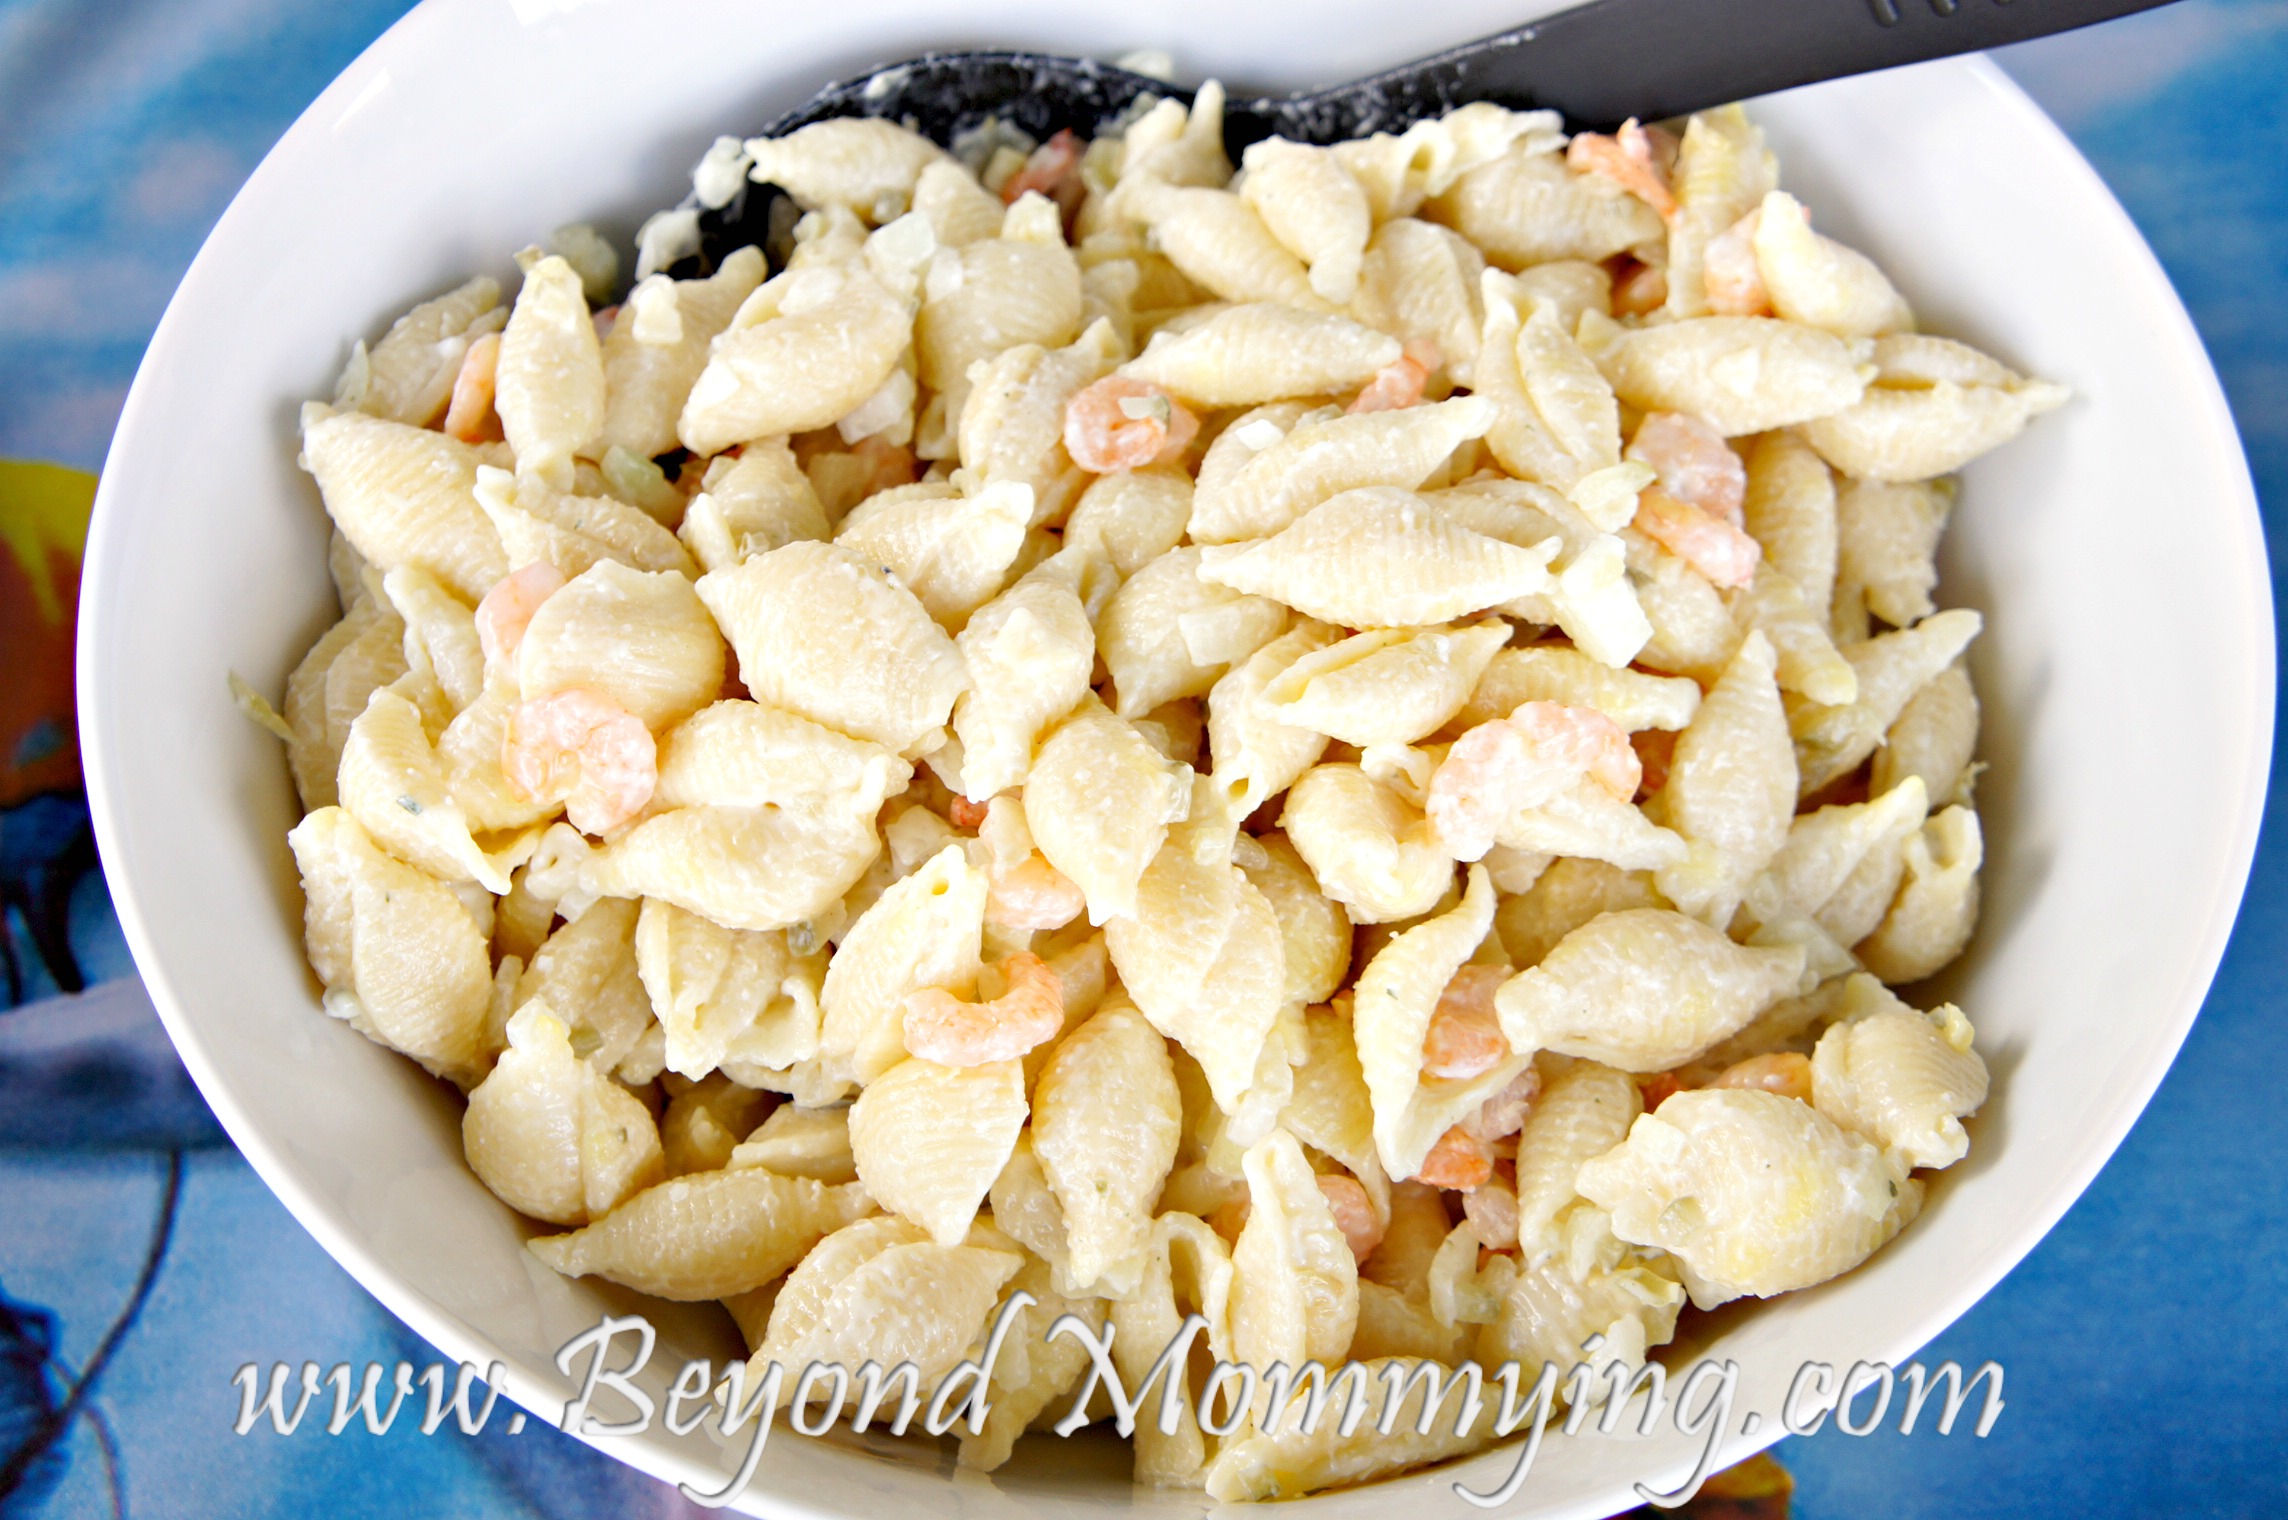 Menu for an Under the Sea Party: Shrimp and Shells Pasta Salad